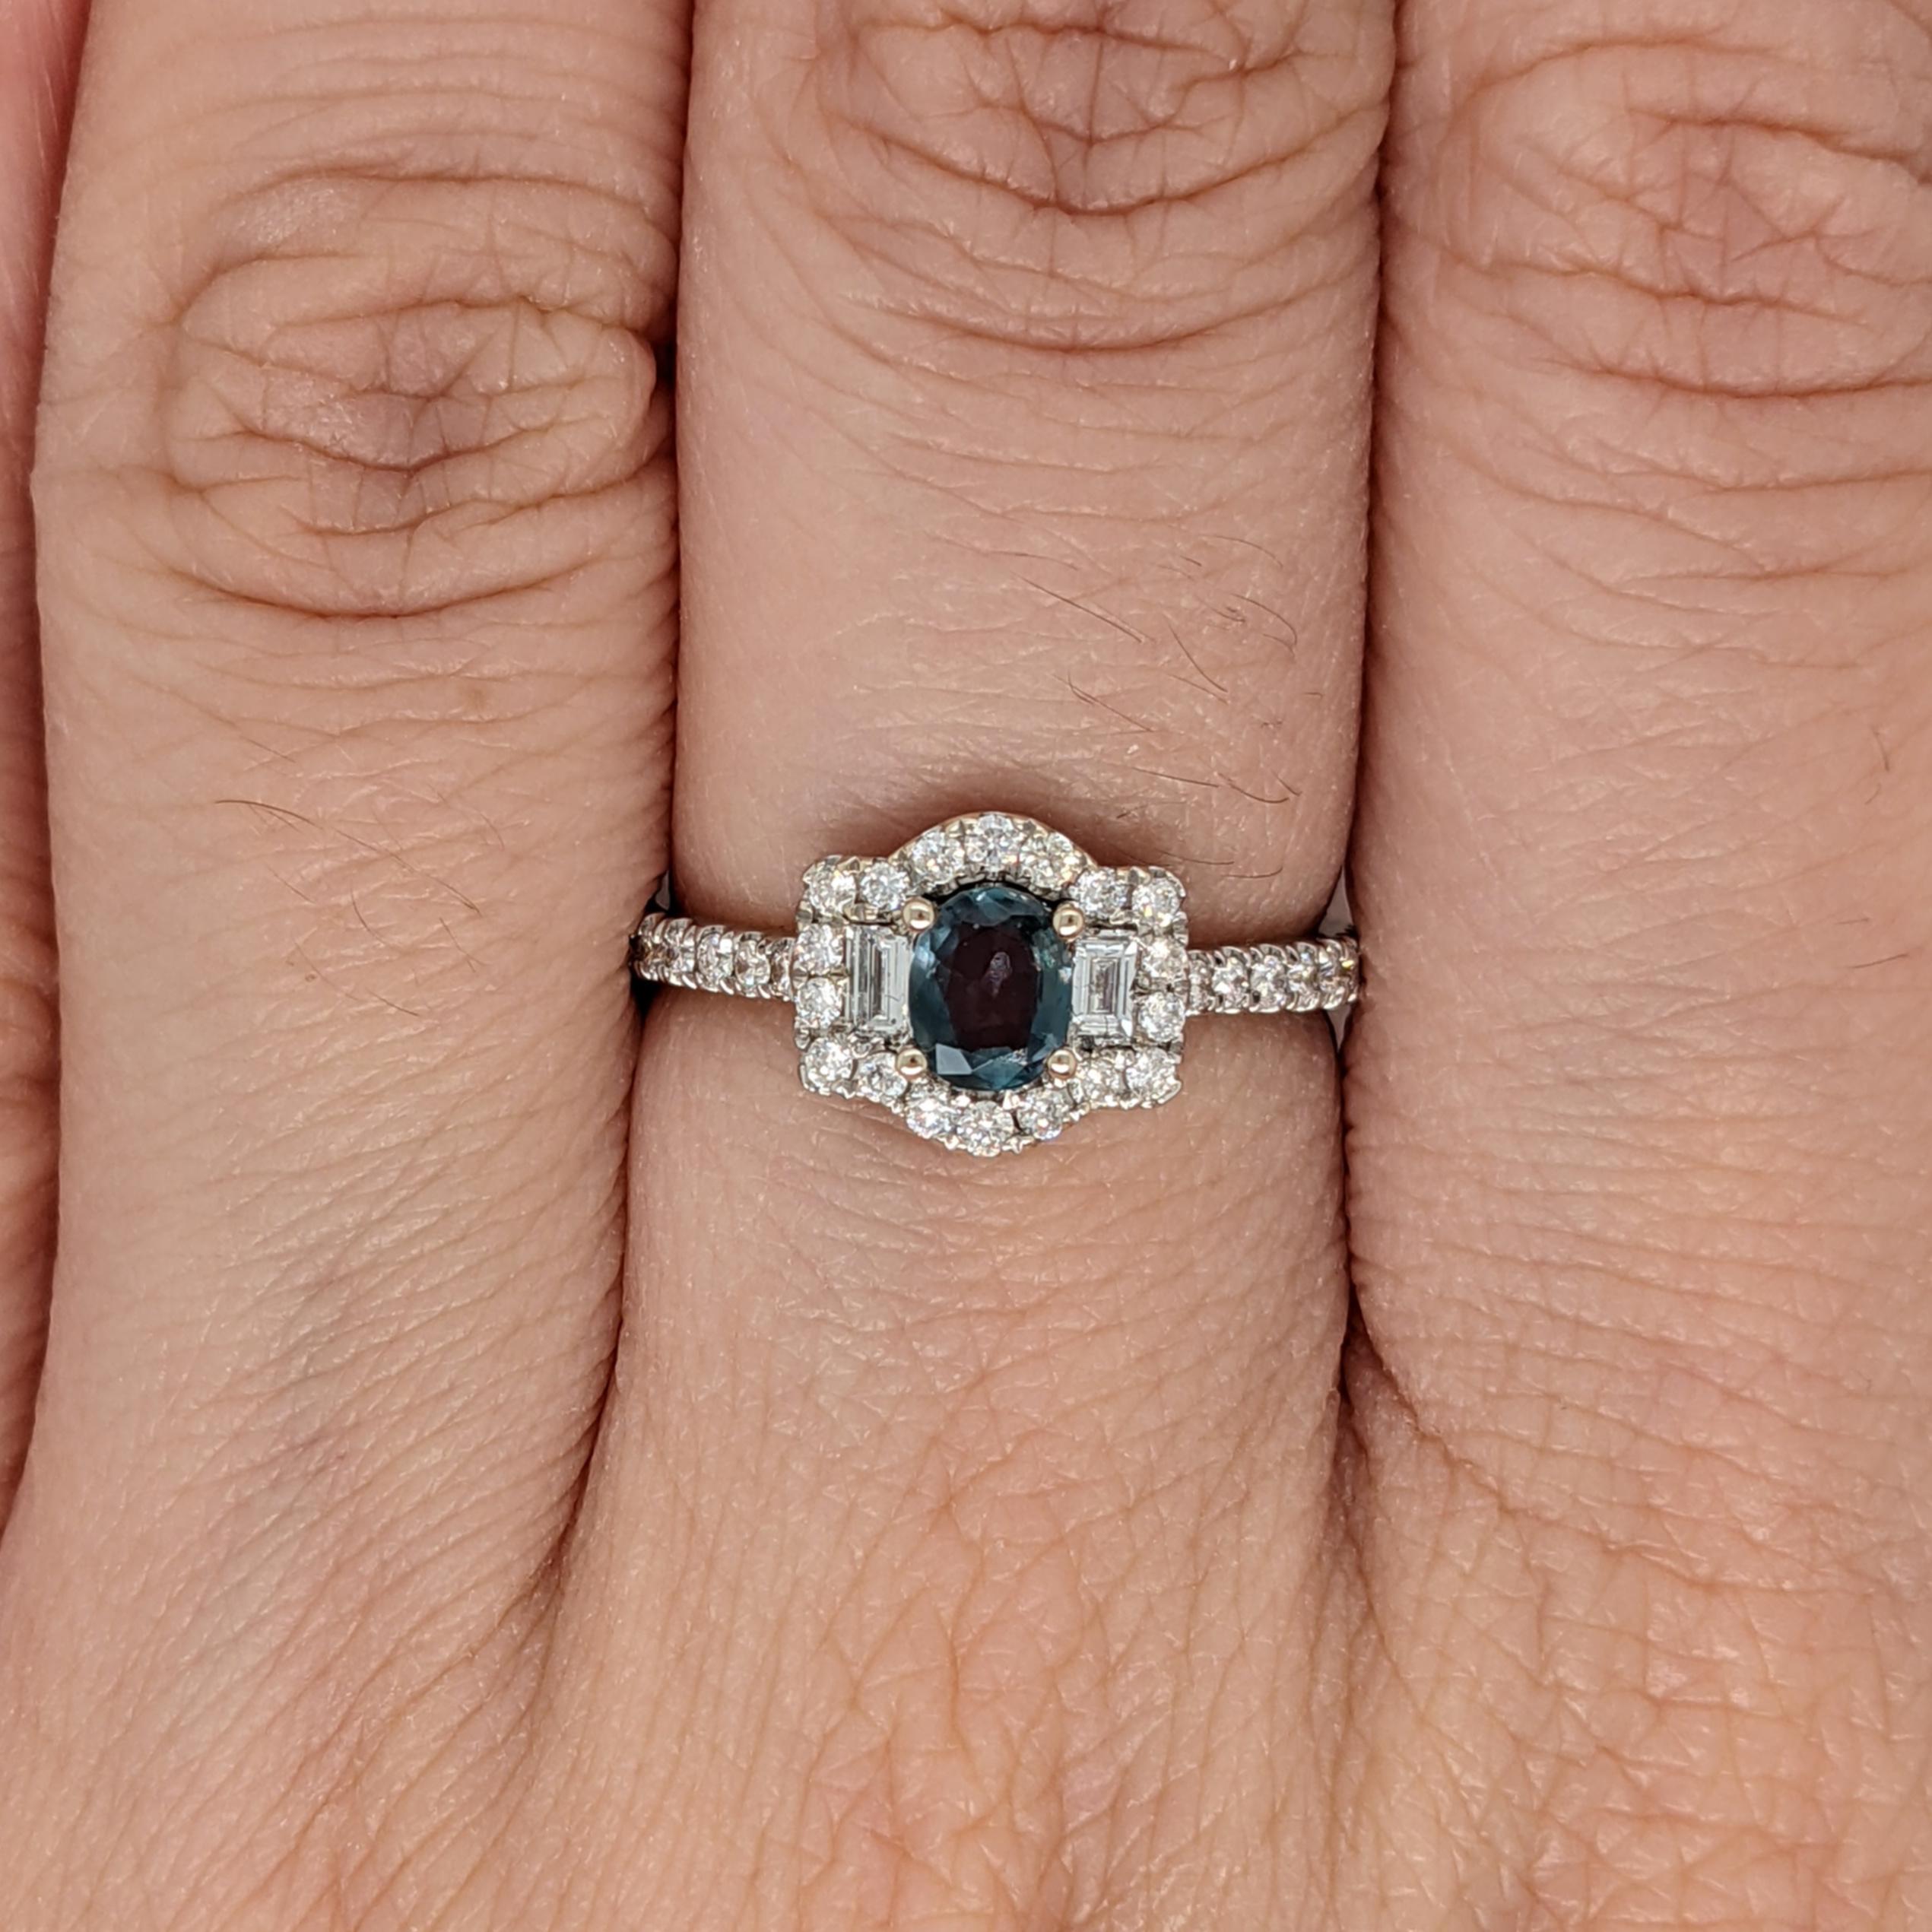 Unique Natural Color Changing Alexandrite Ring with Baguette Diamond Accents